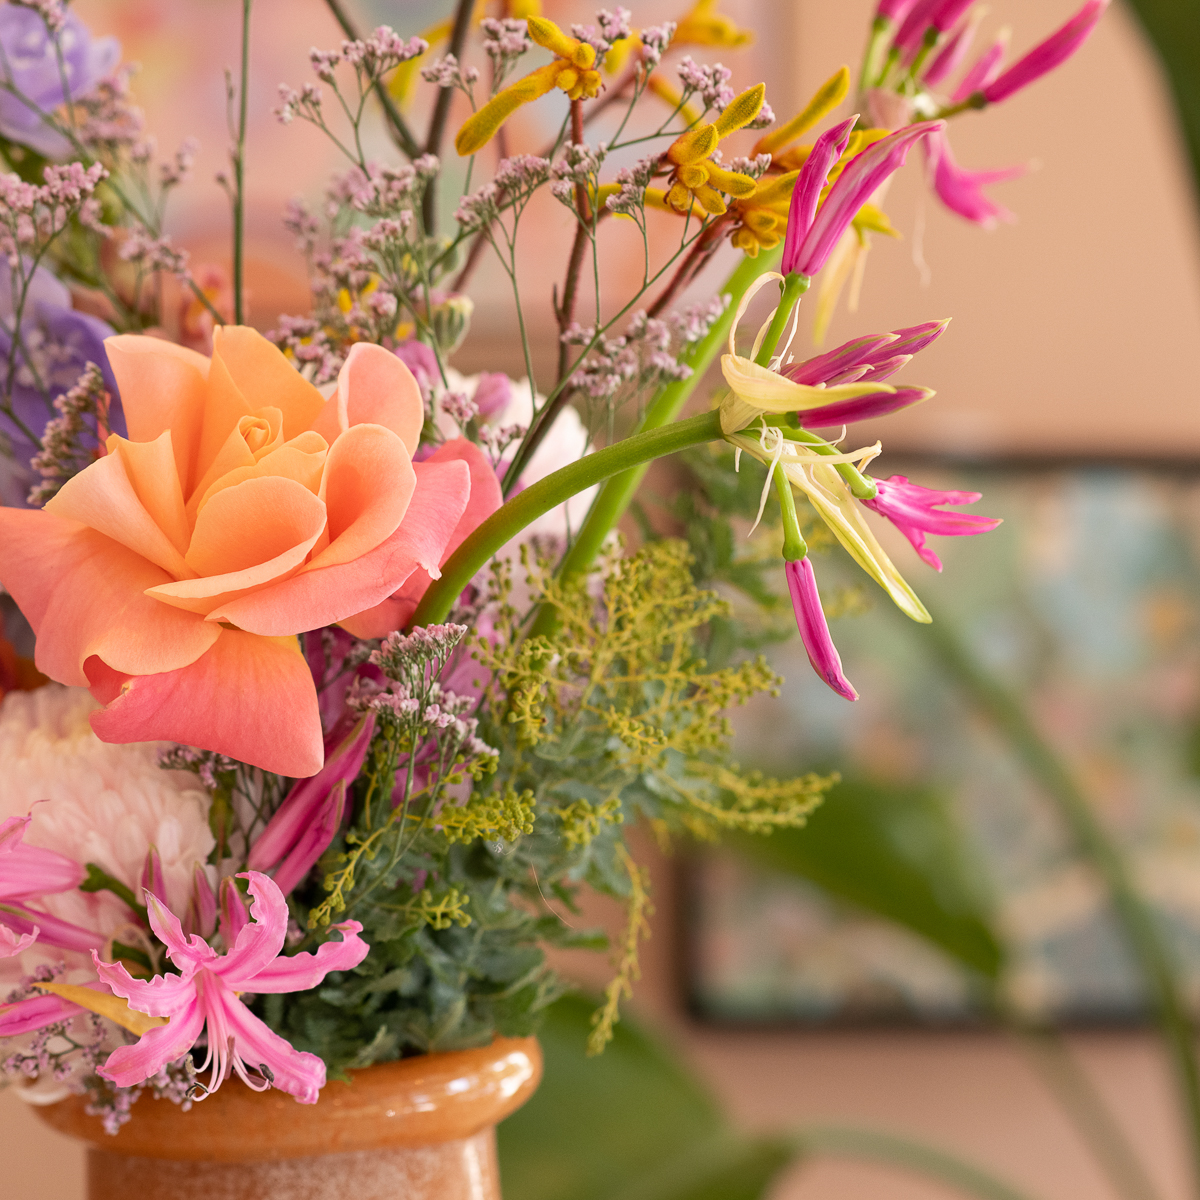 Detail image of colour flowers sitting in a vase.